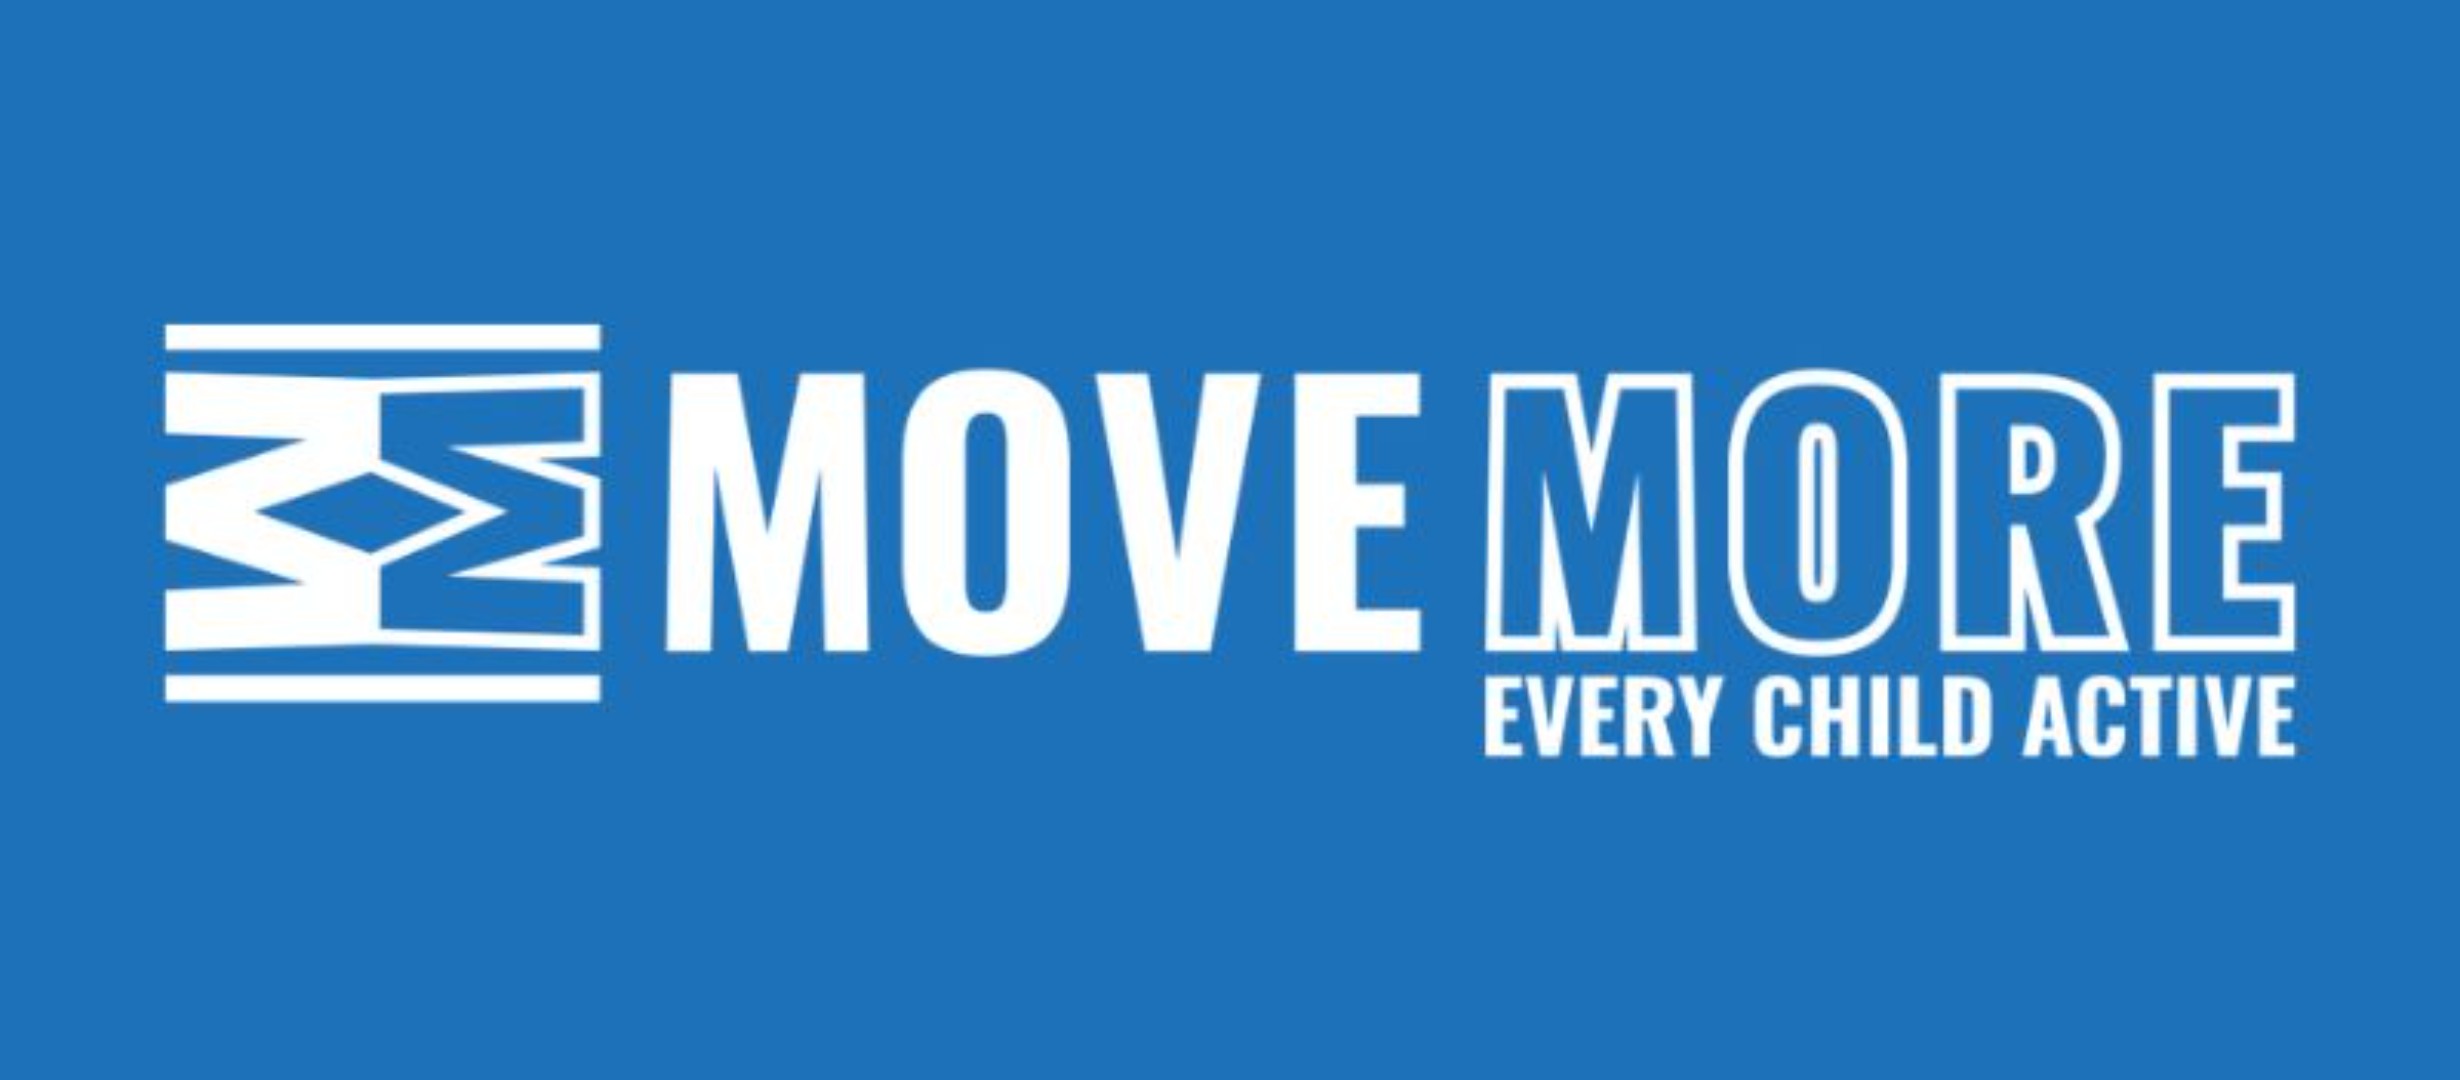 Blue background with white words 'Move More' 'Every child active'